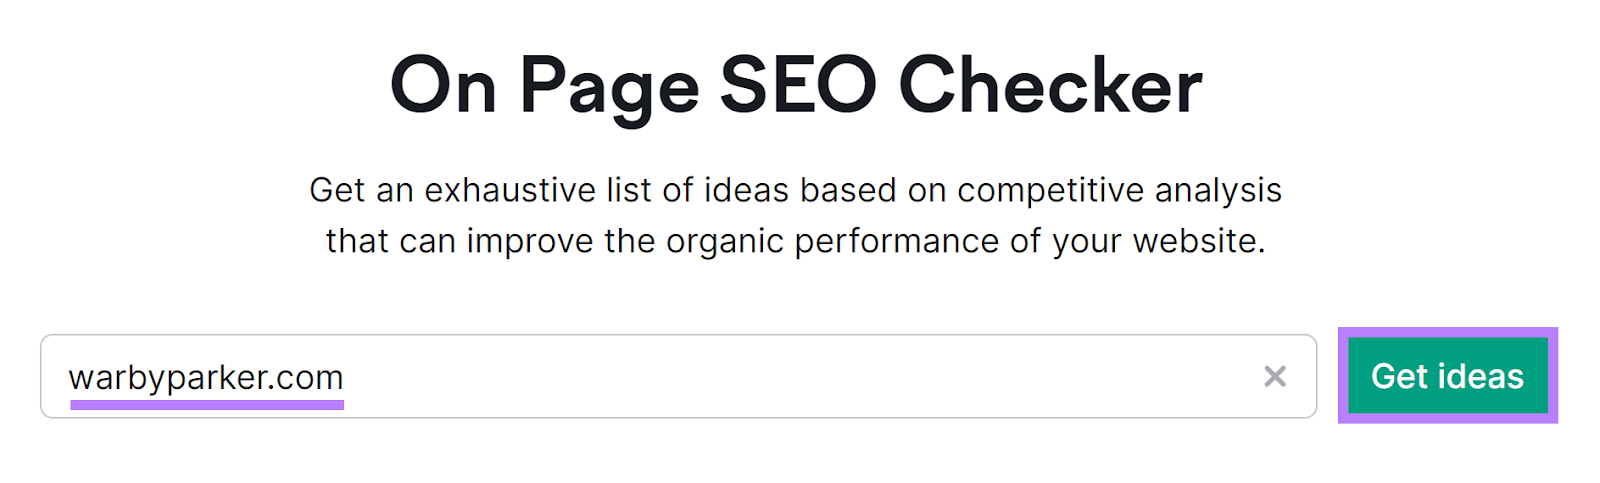 Semrush On Page SEO Checker tool start with domain entered and Get ideas button highlighted.